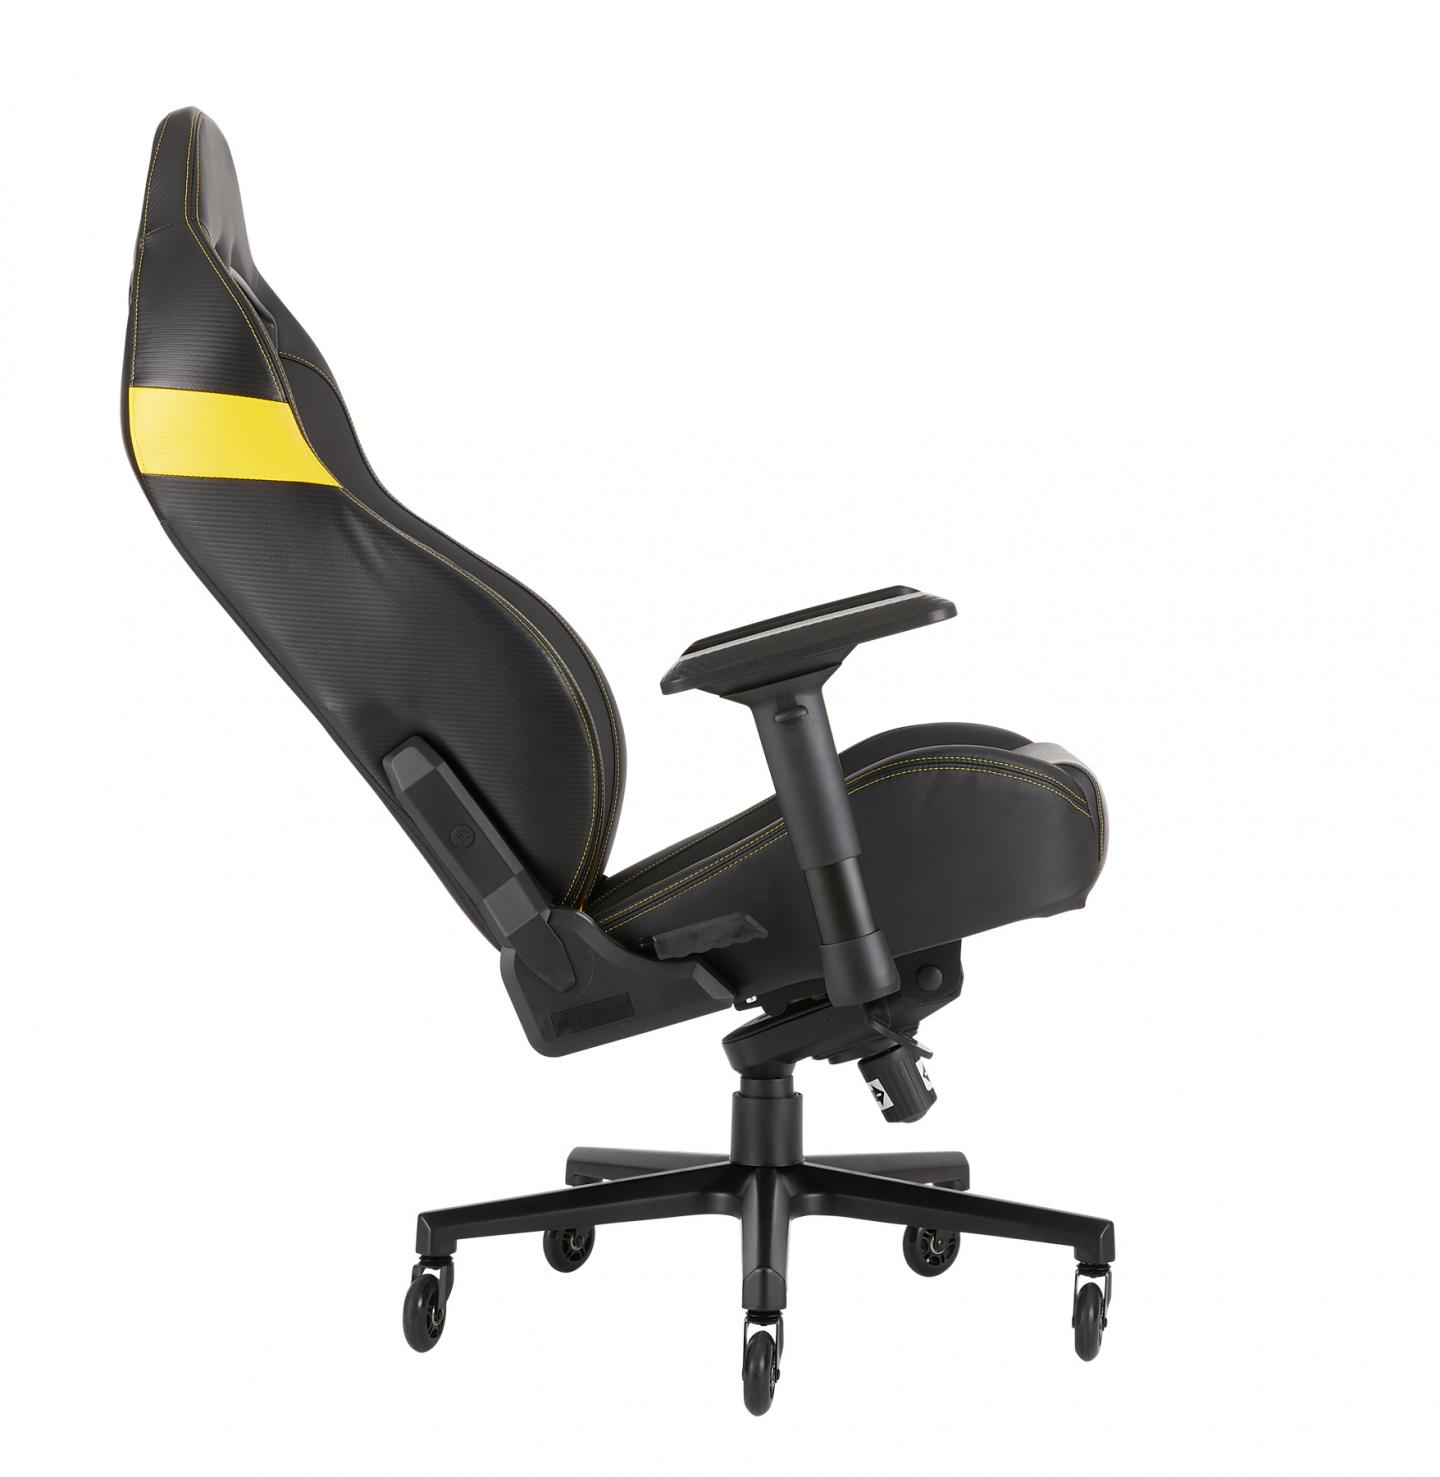 T2_chair_ylo_07